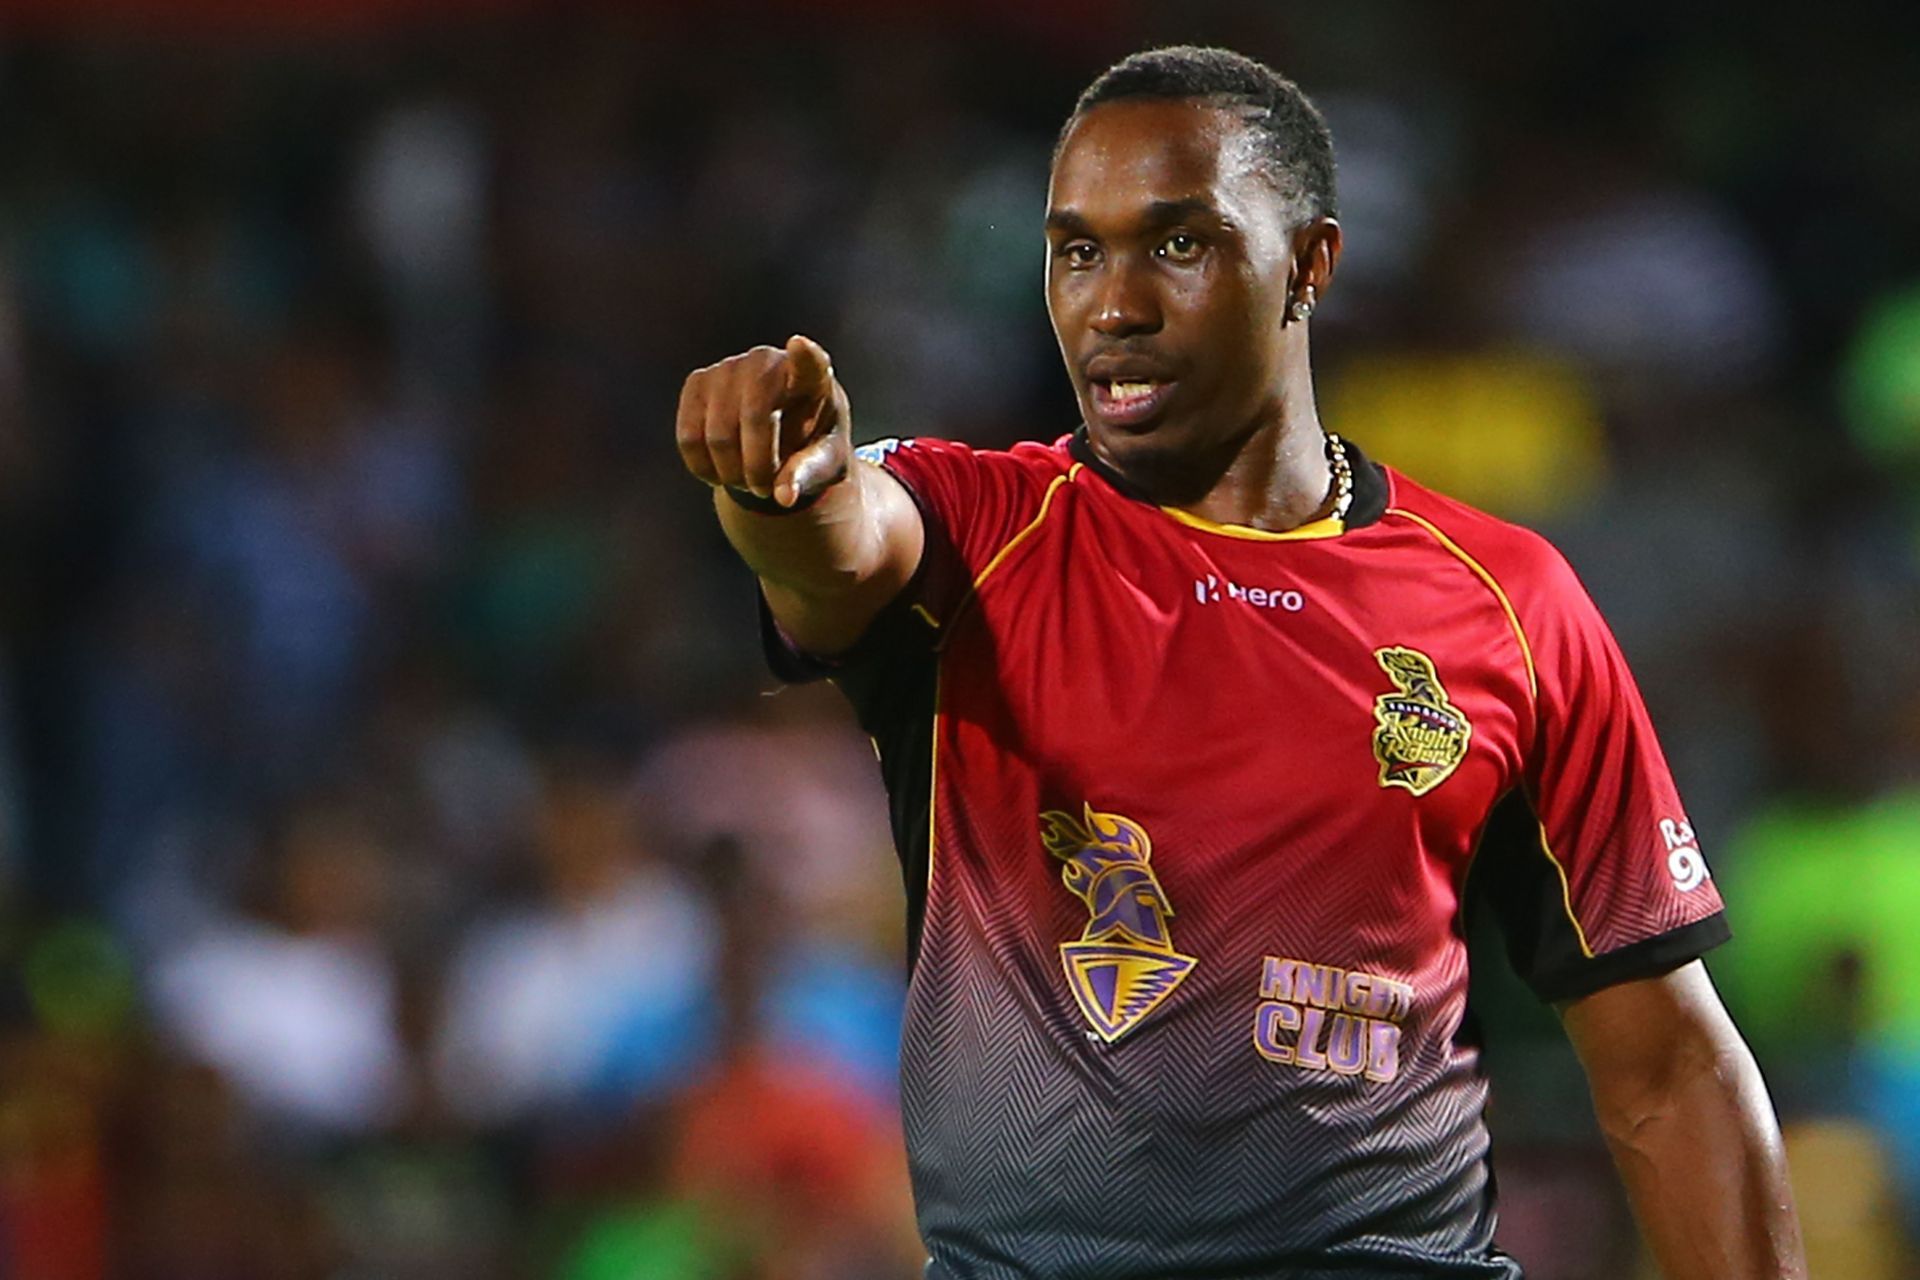 Dwayne Bravo could well be the key in this T20 World Cup